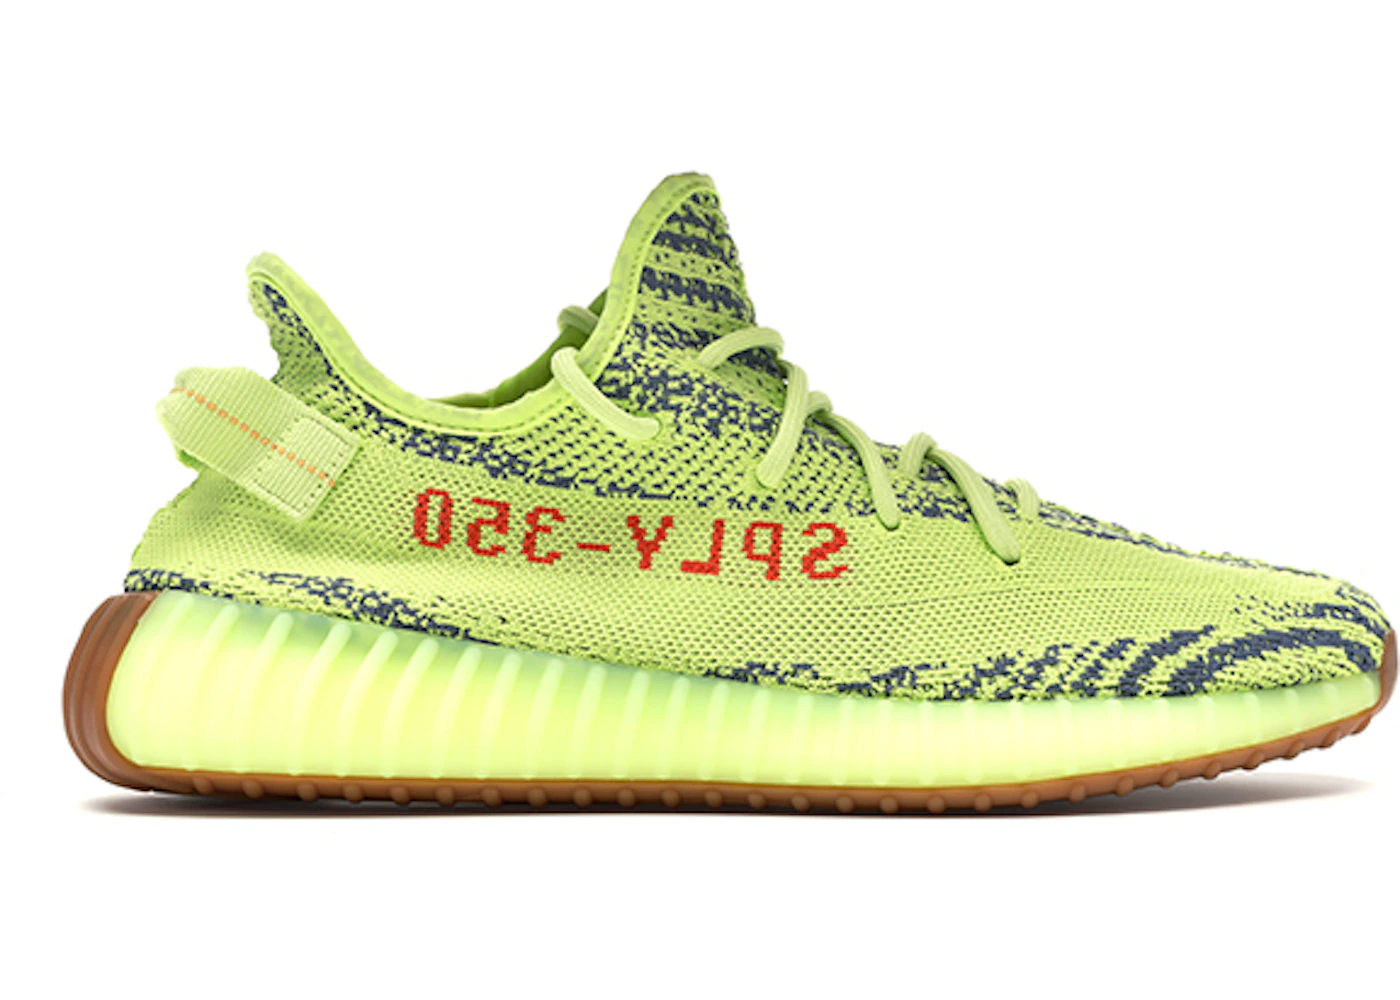 resterende Revival shuffle adidas Yeezy Boost 350 V2 Semi Frozen Yellow - B37572 - US